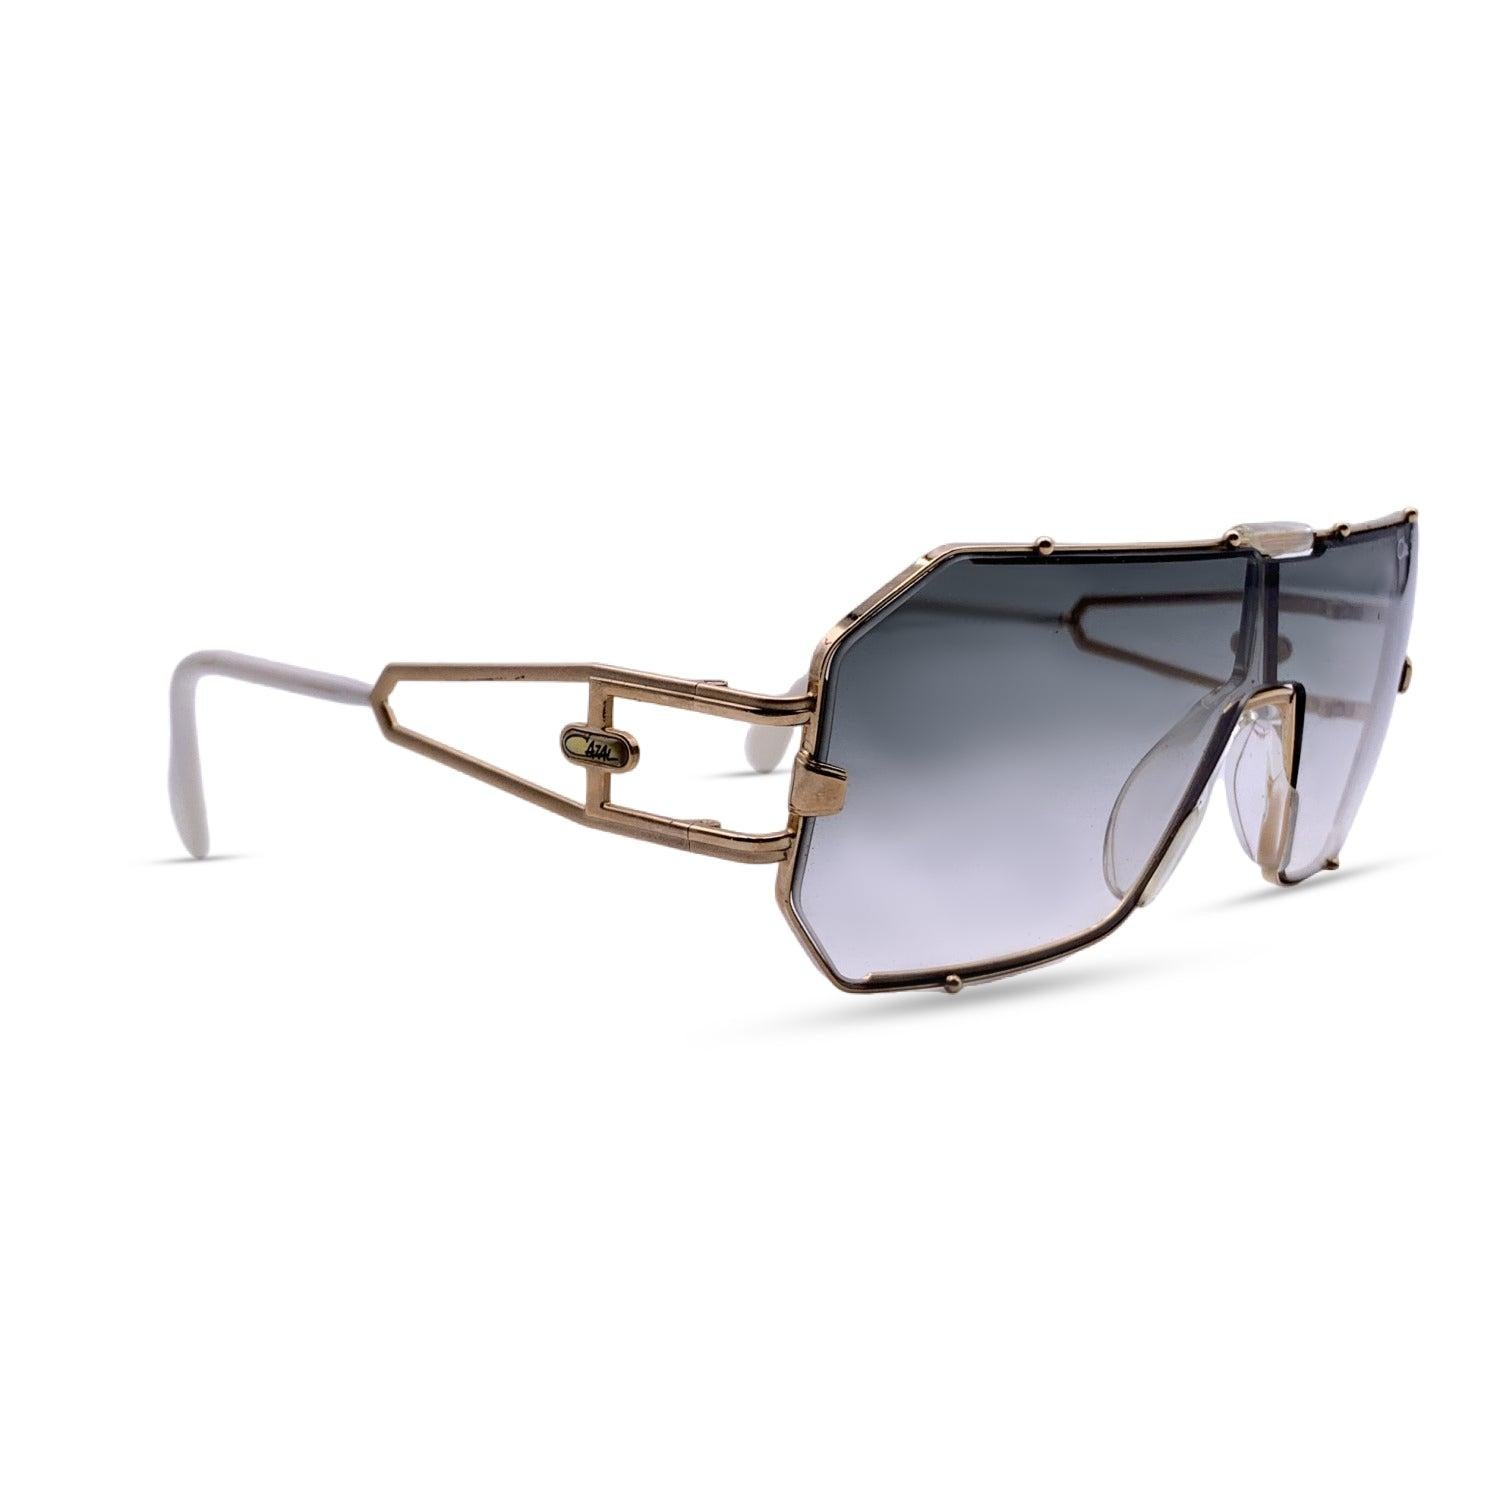 Beautiful sunglasses by Cazal, Mod. 904 Col. 97. Shield frame. Gradient one piece lens in grey color. This model has an interchangeable lens system (brown lens included). Gold metal frame. Cazal logo on temples. Made in W.Germany. Details MATERIAL: